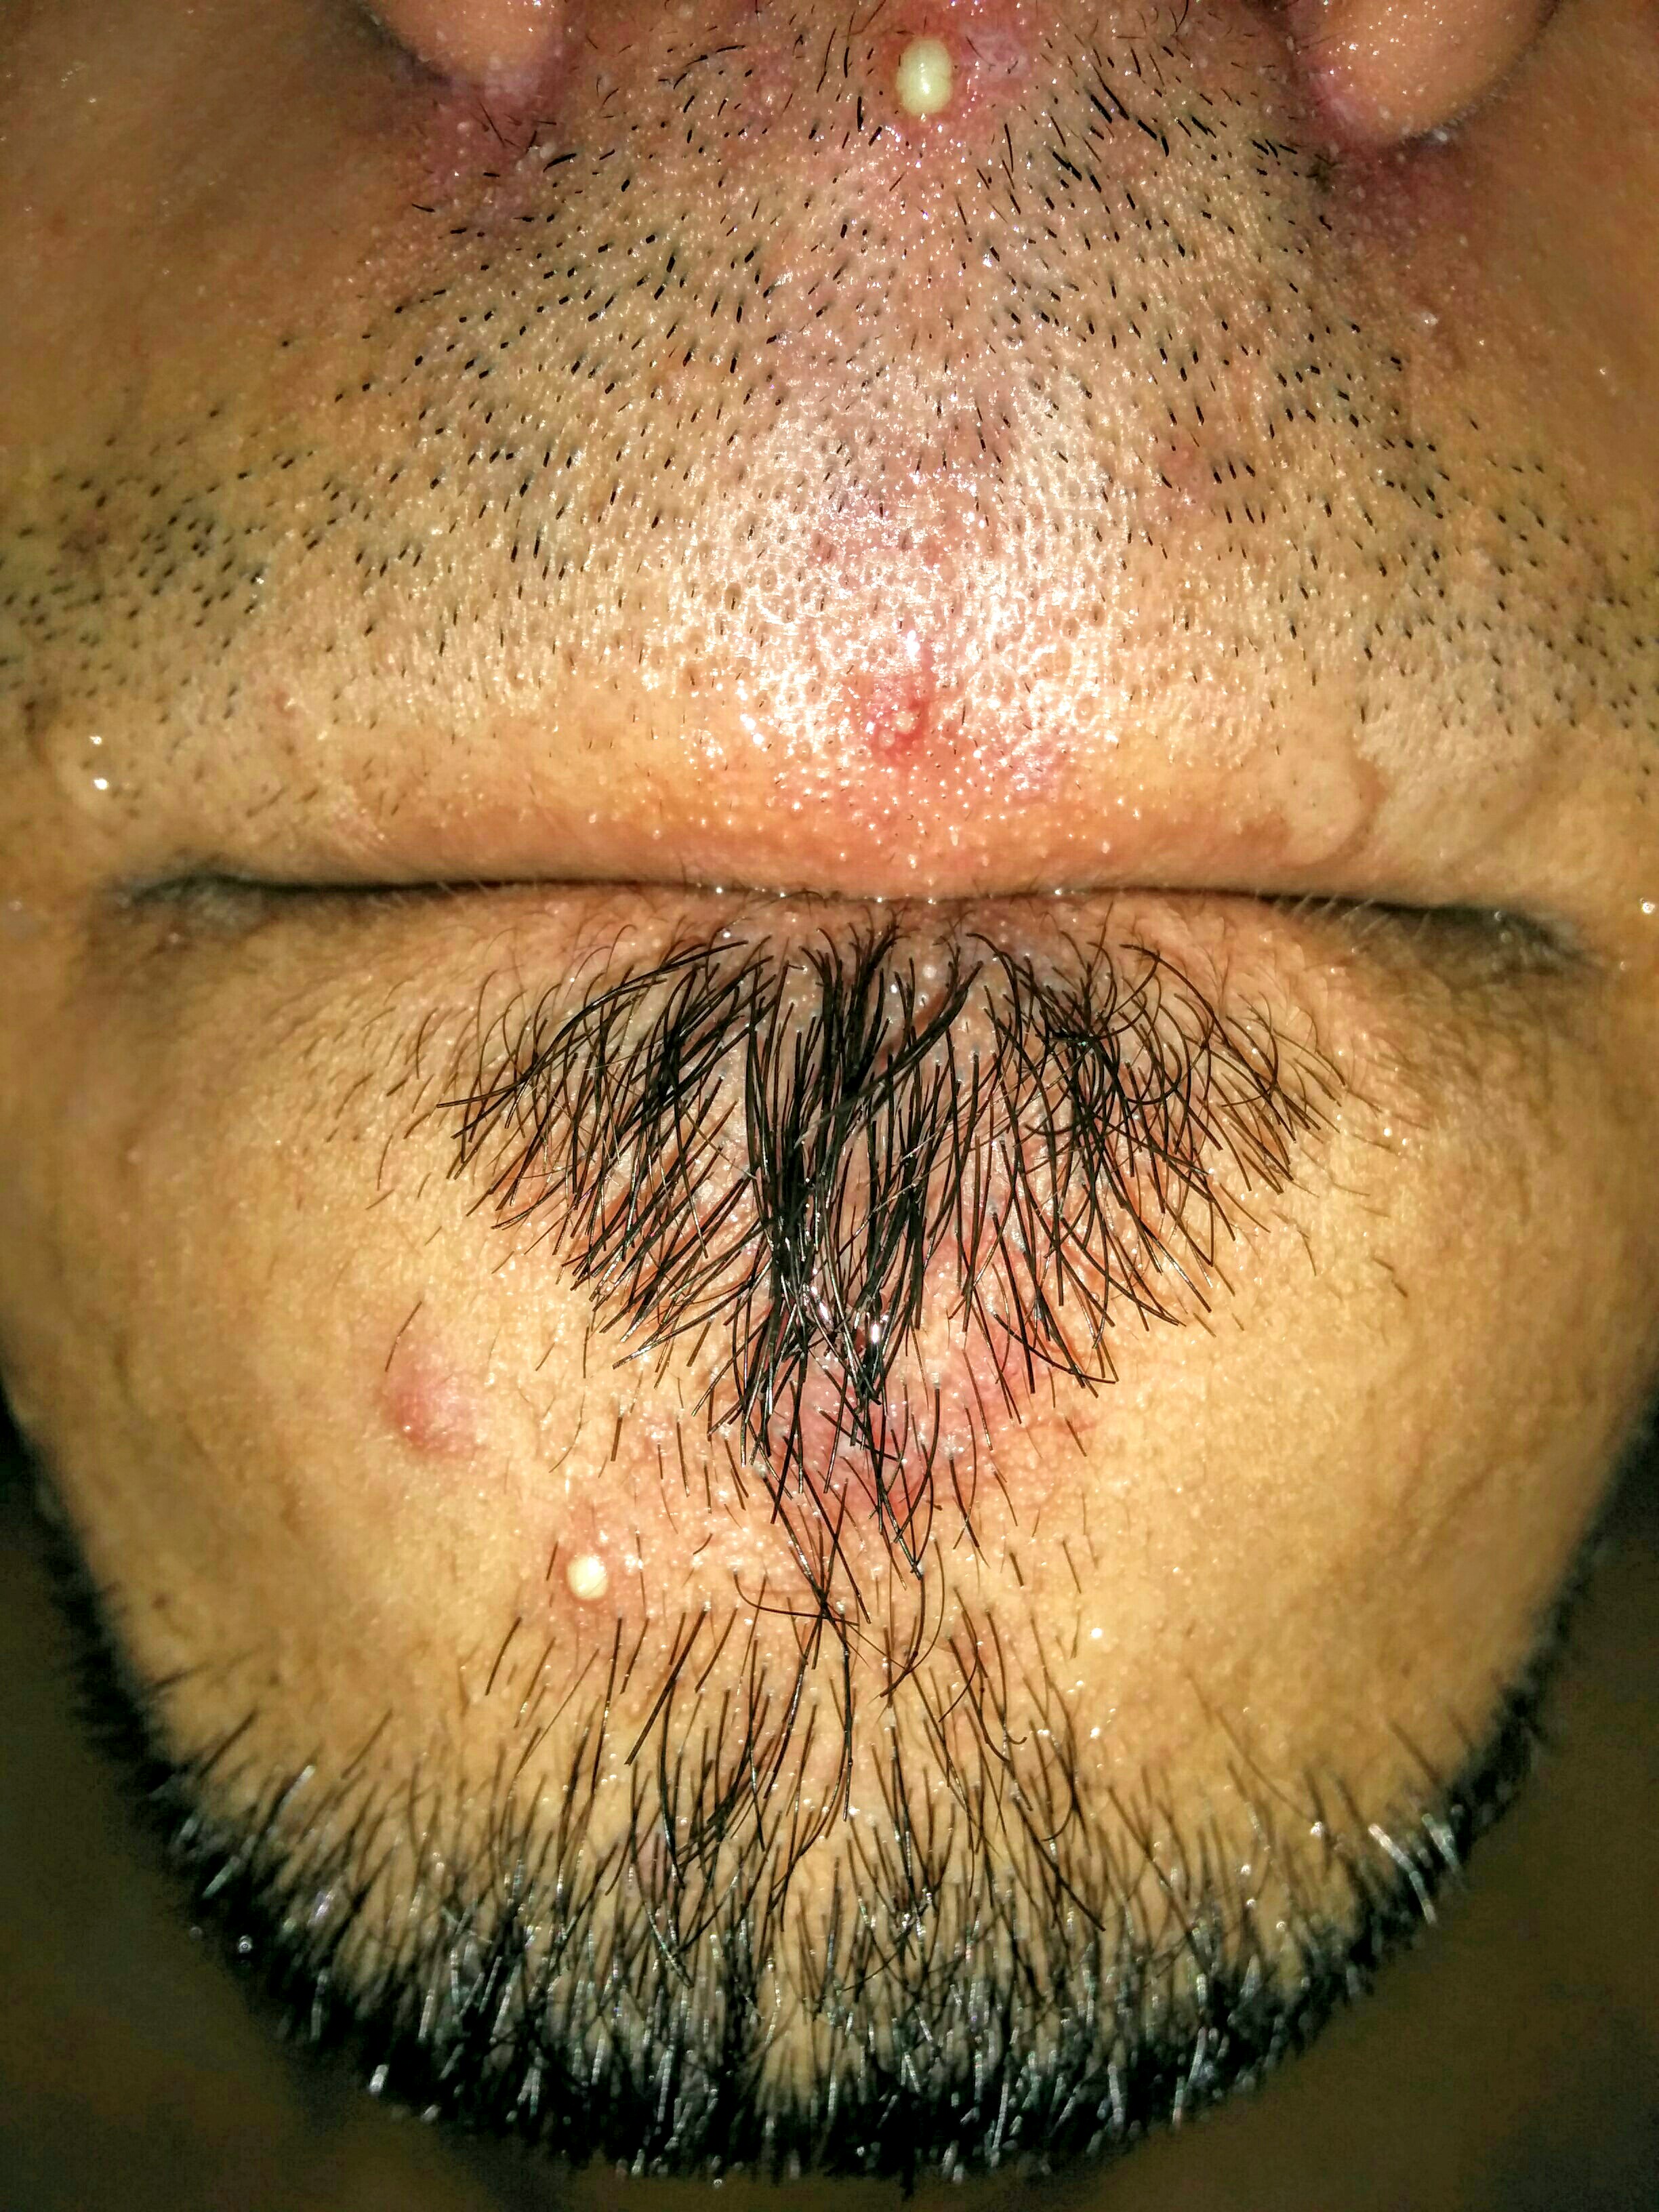 White Pustules Around Mouth/nose. Pictures Included ...